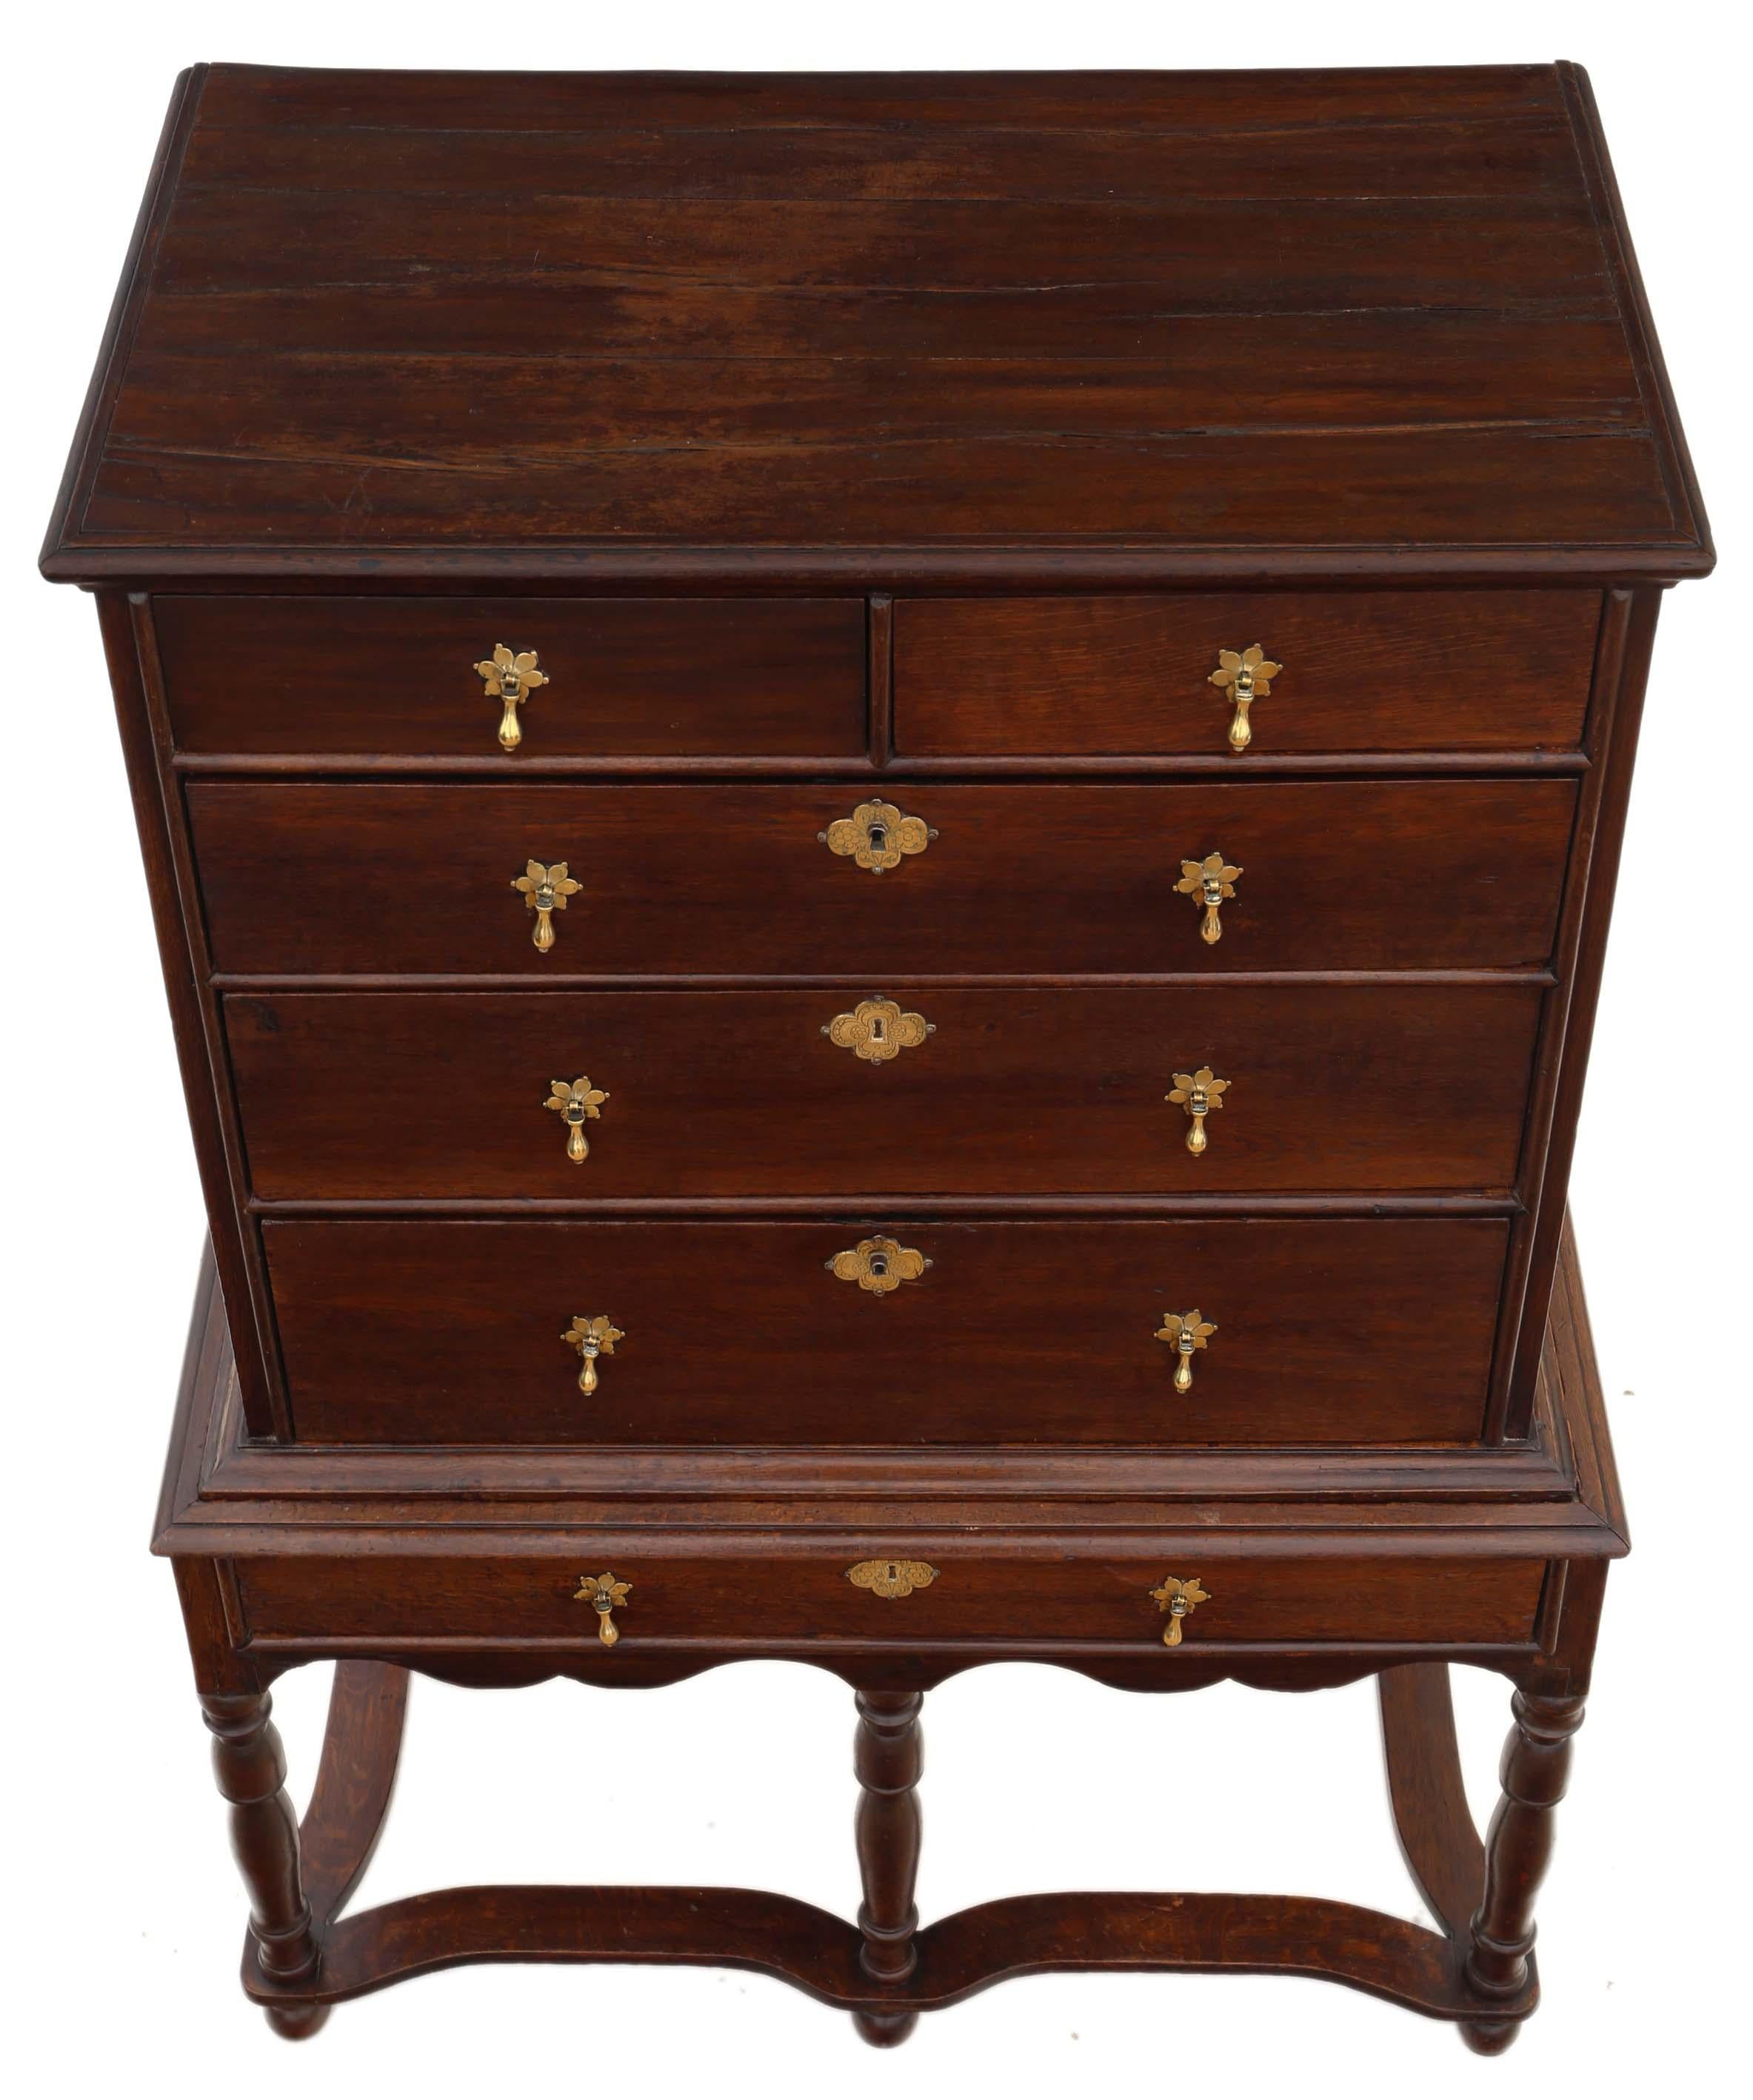 Antique Georgian 18th century and later oak chest of drawers on stand

This is a lovely chest, that is full of age, charm and character.

No loose joints and the drawers slide freely. Separates into two haves for transport.

Good shape and